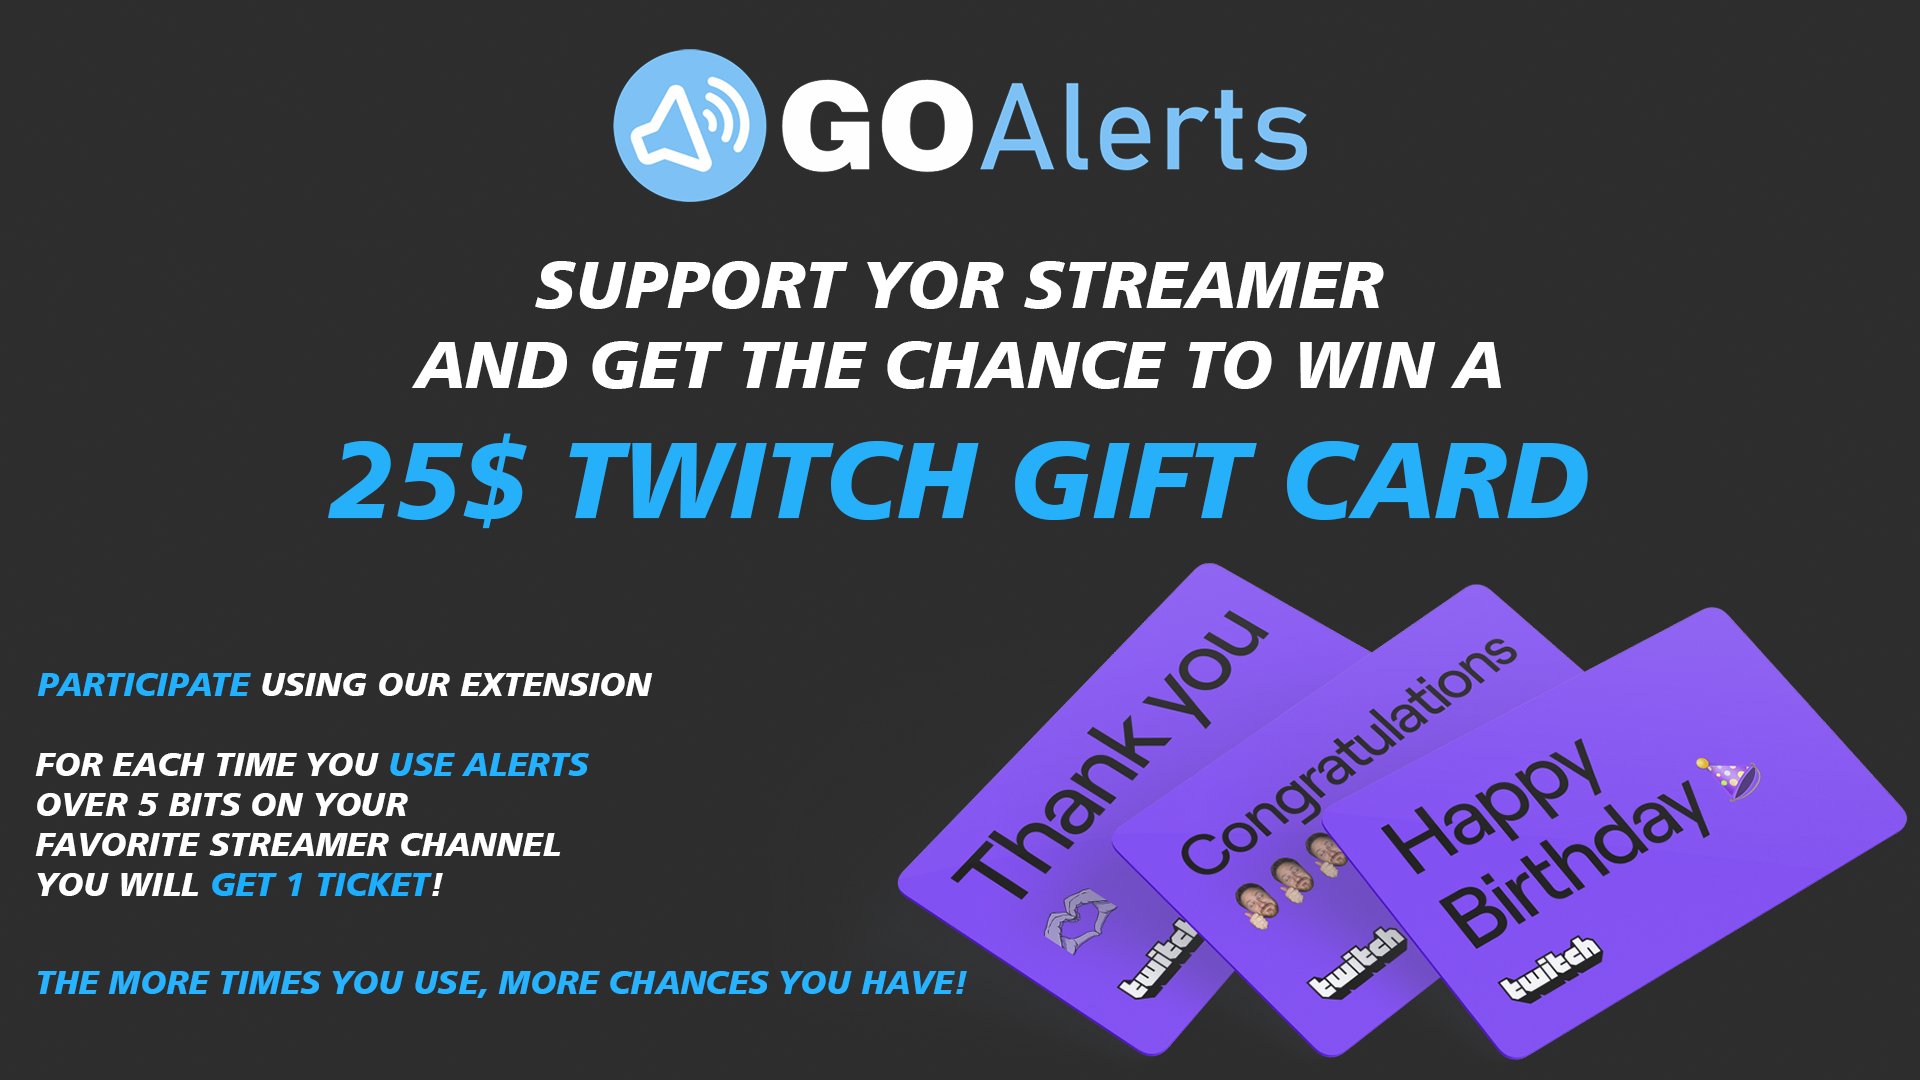 Goalerts Support Your Streamer And Get The Change To Win A 25 Twitch Gift Card Every Time You Use 1 Alert Using Bits On Goalerts Extension You Will Get 1